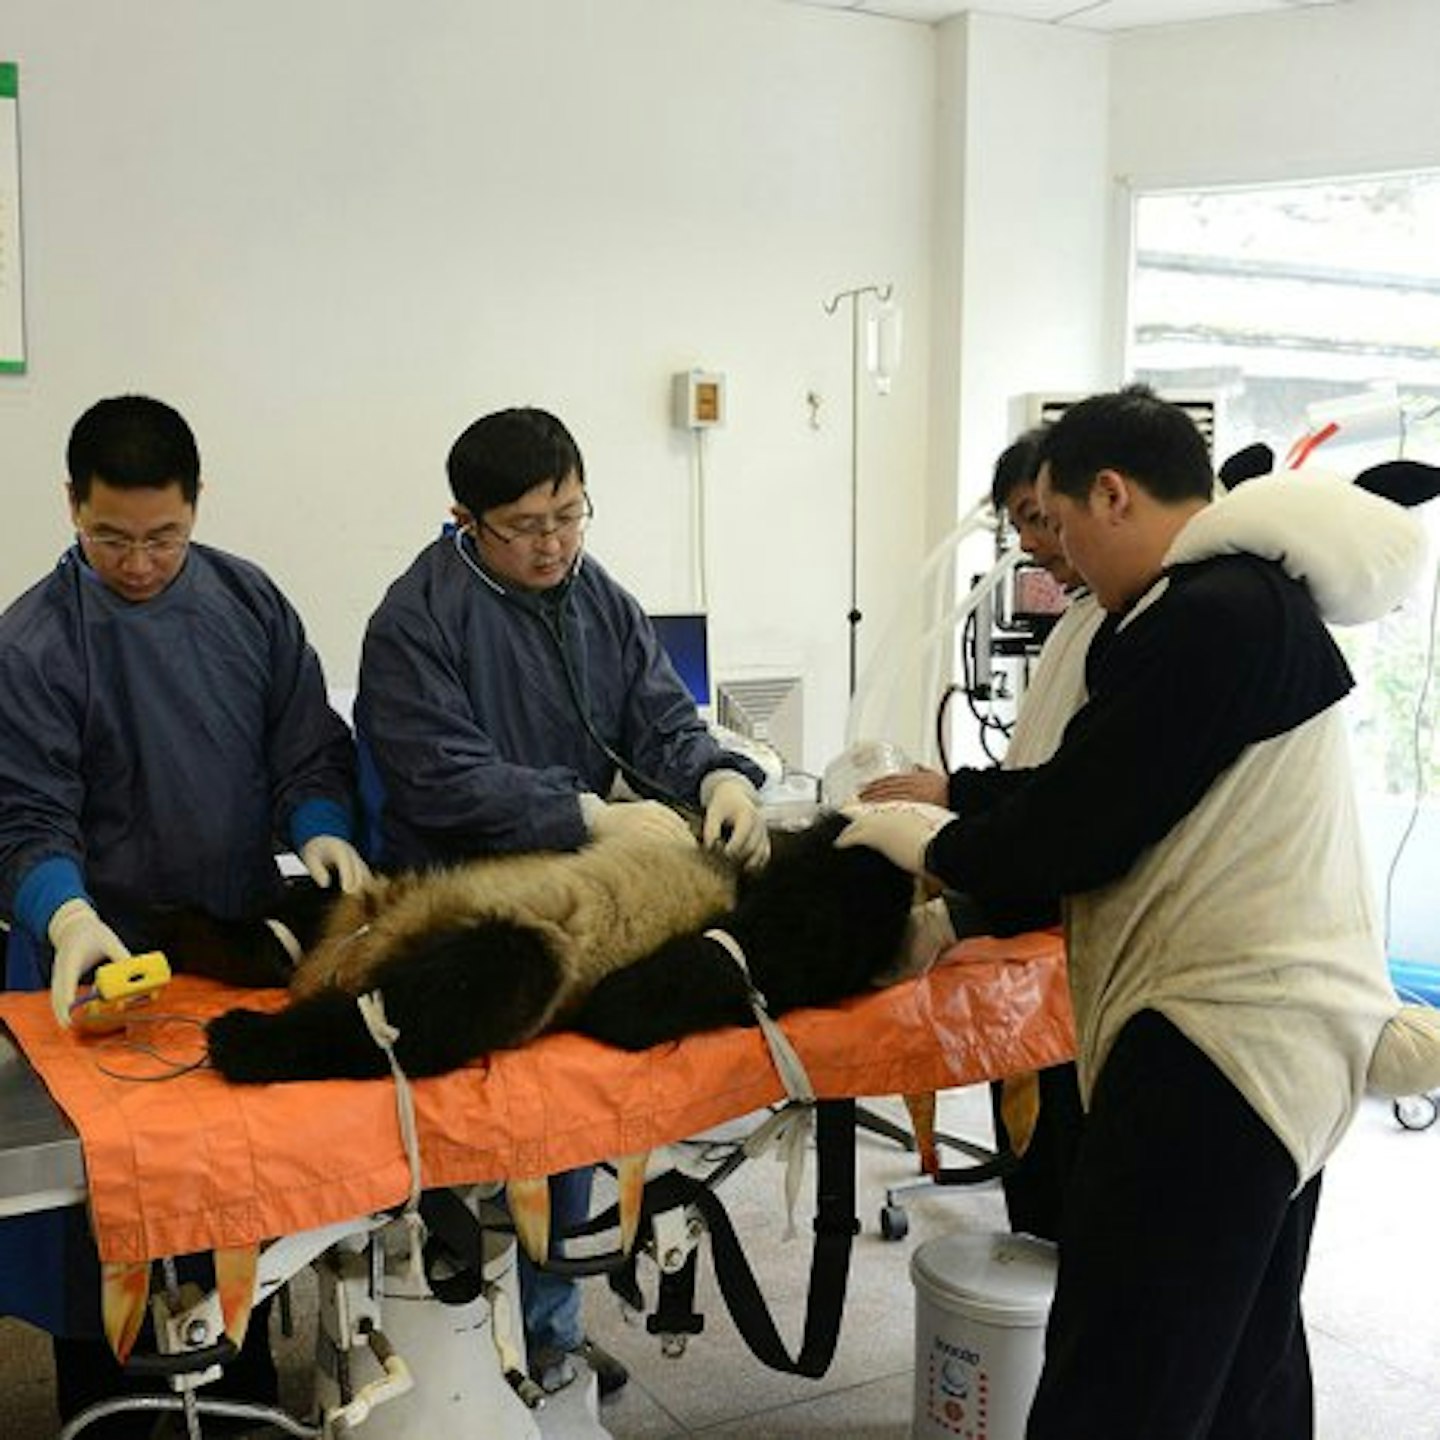 Zhang was given the all-clear during her health examination